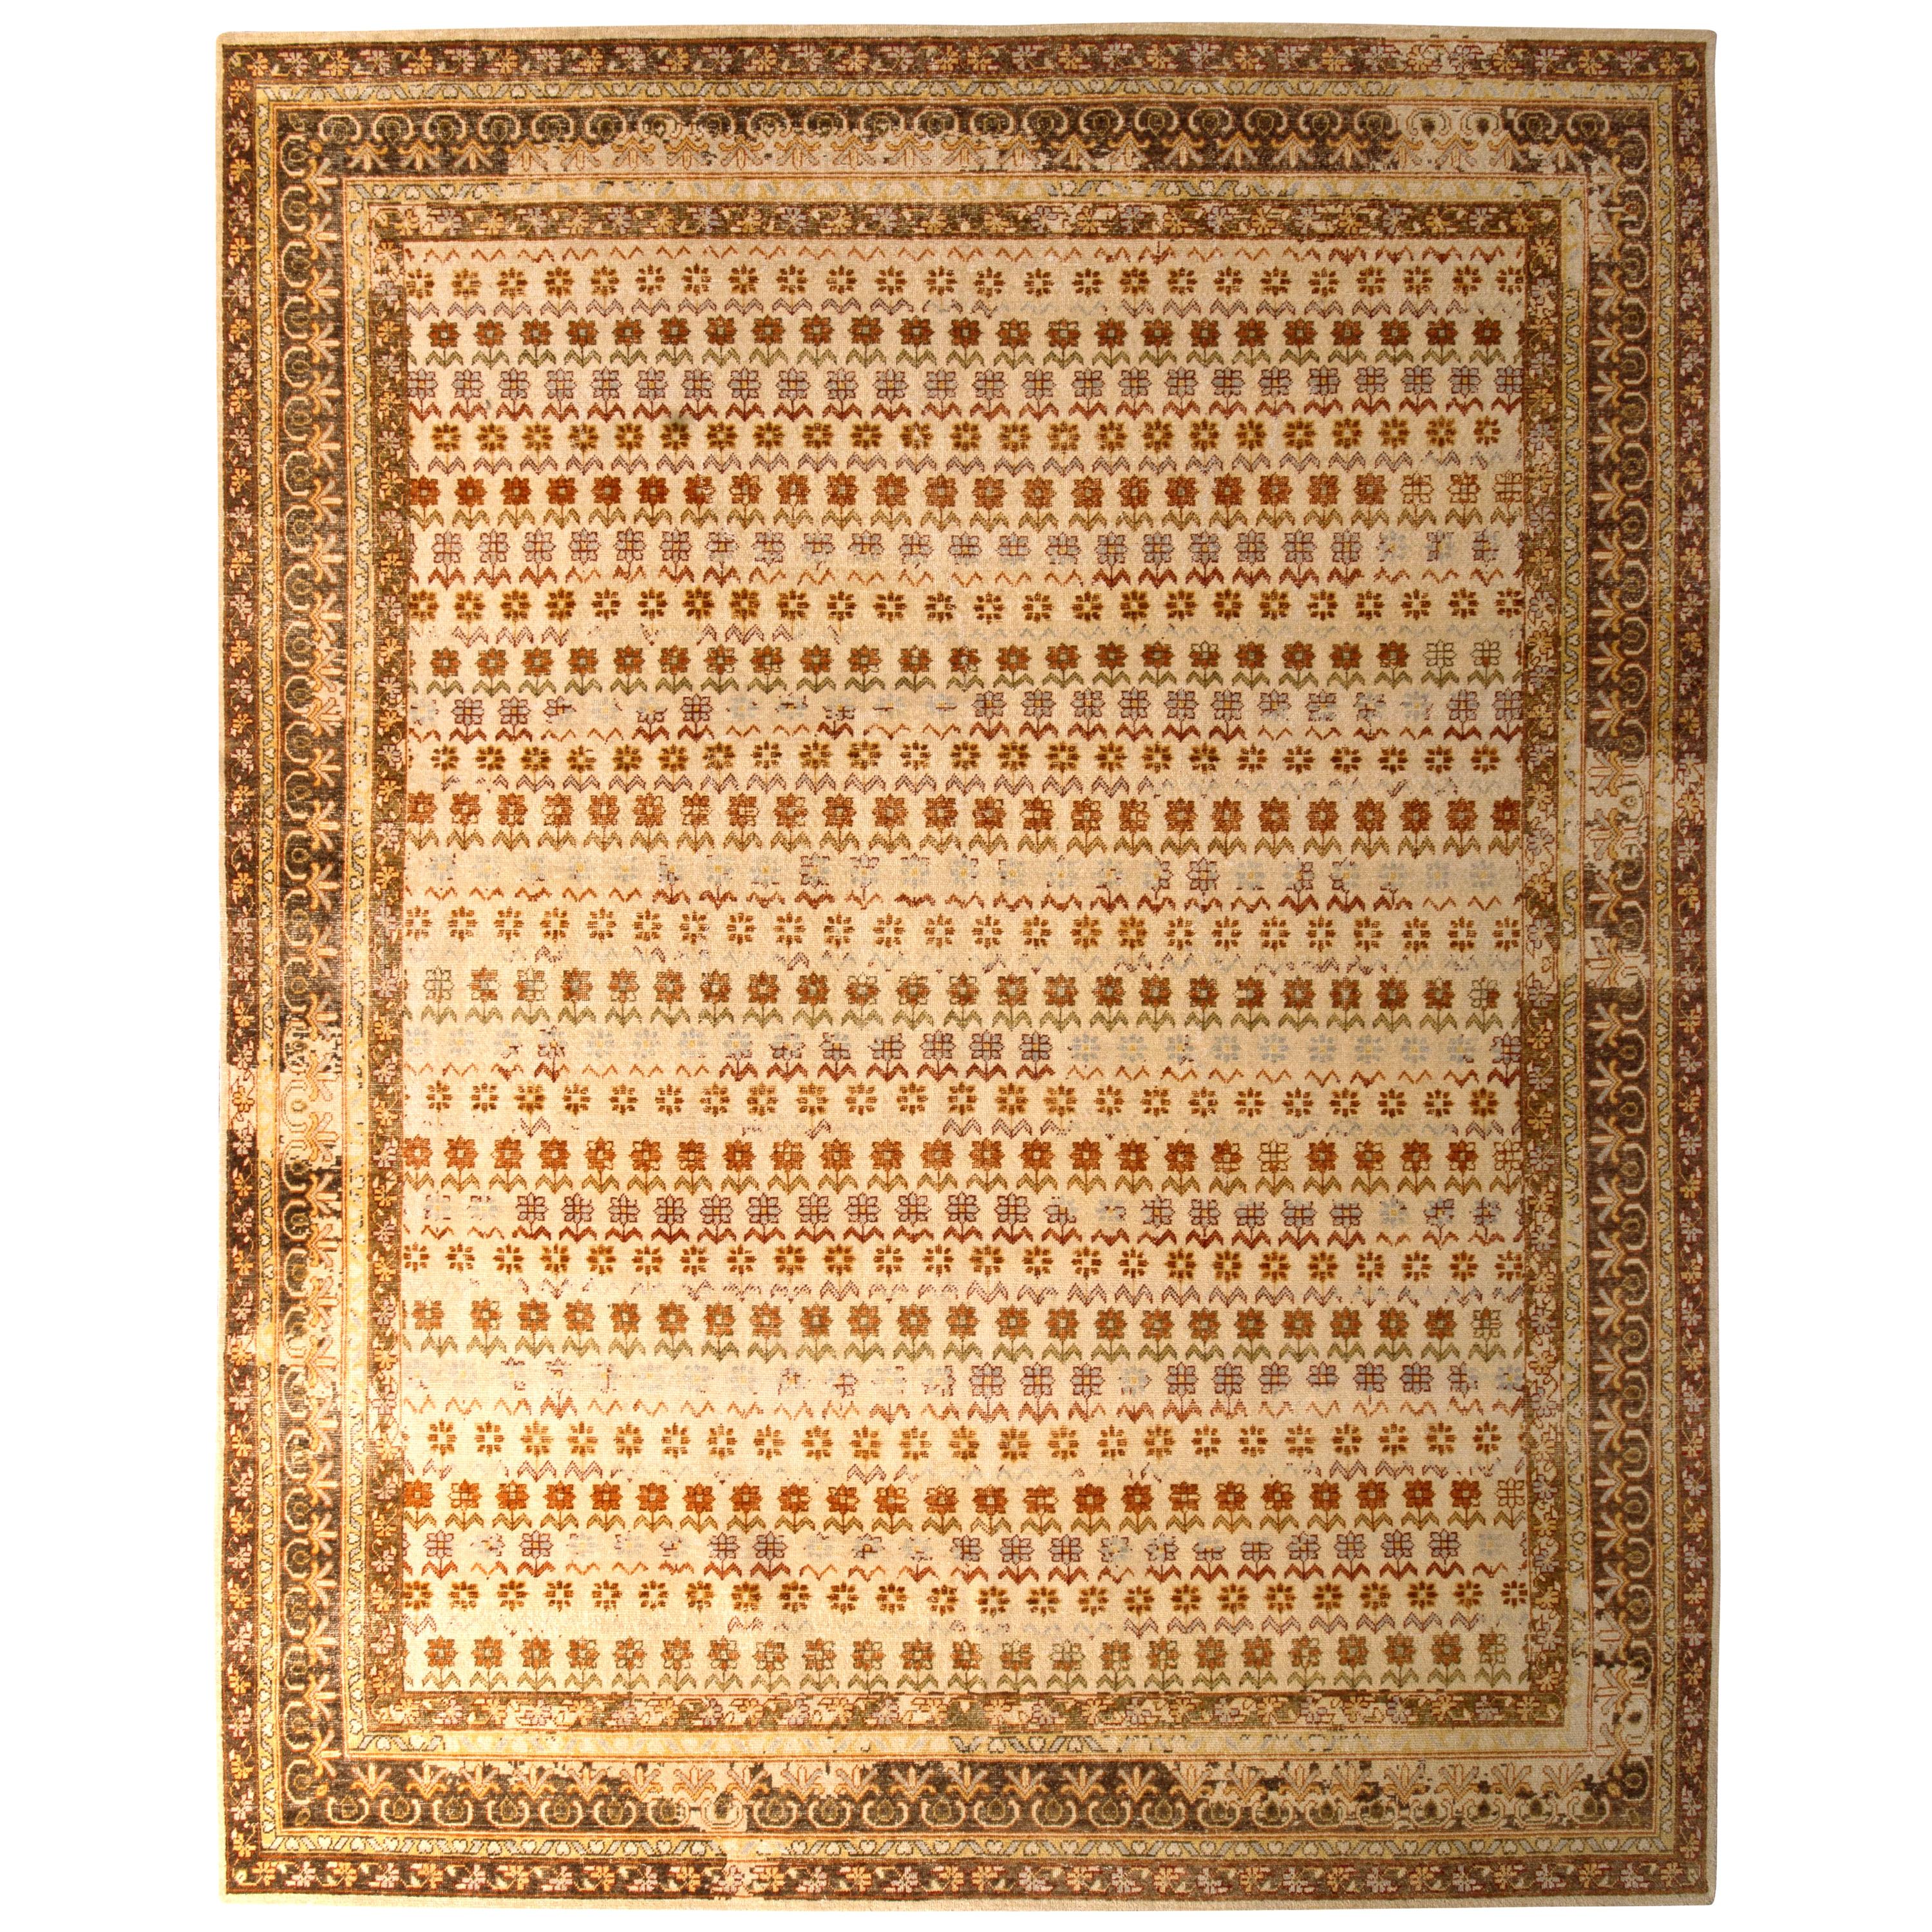 Rug & Kilim's Hand Knotted Agra Style Rug Beige Brown Striped Floral Pattern